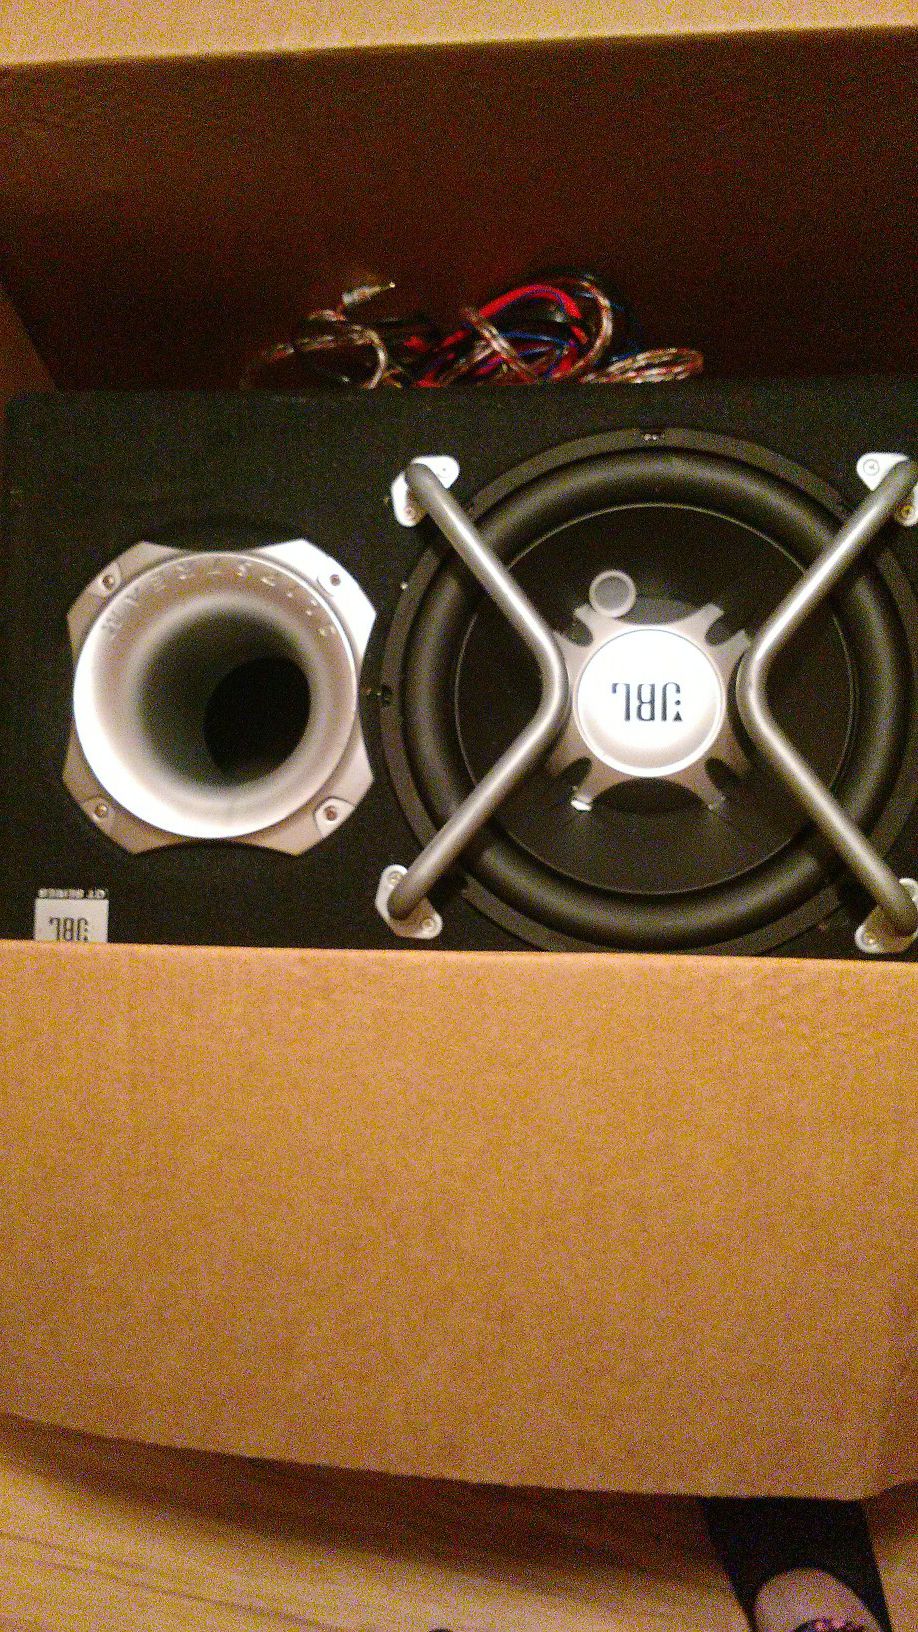 JBL 10" speaker box amplifier included. Also a jvc Bluetooth mp3 car stereo